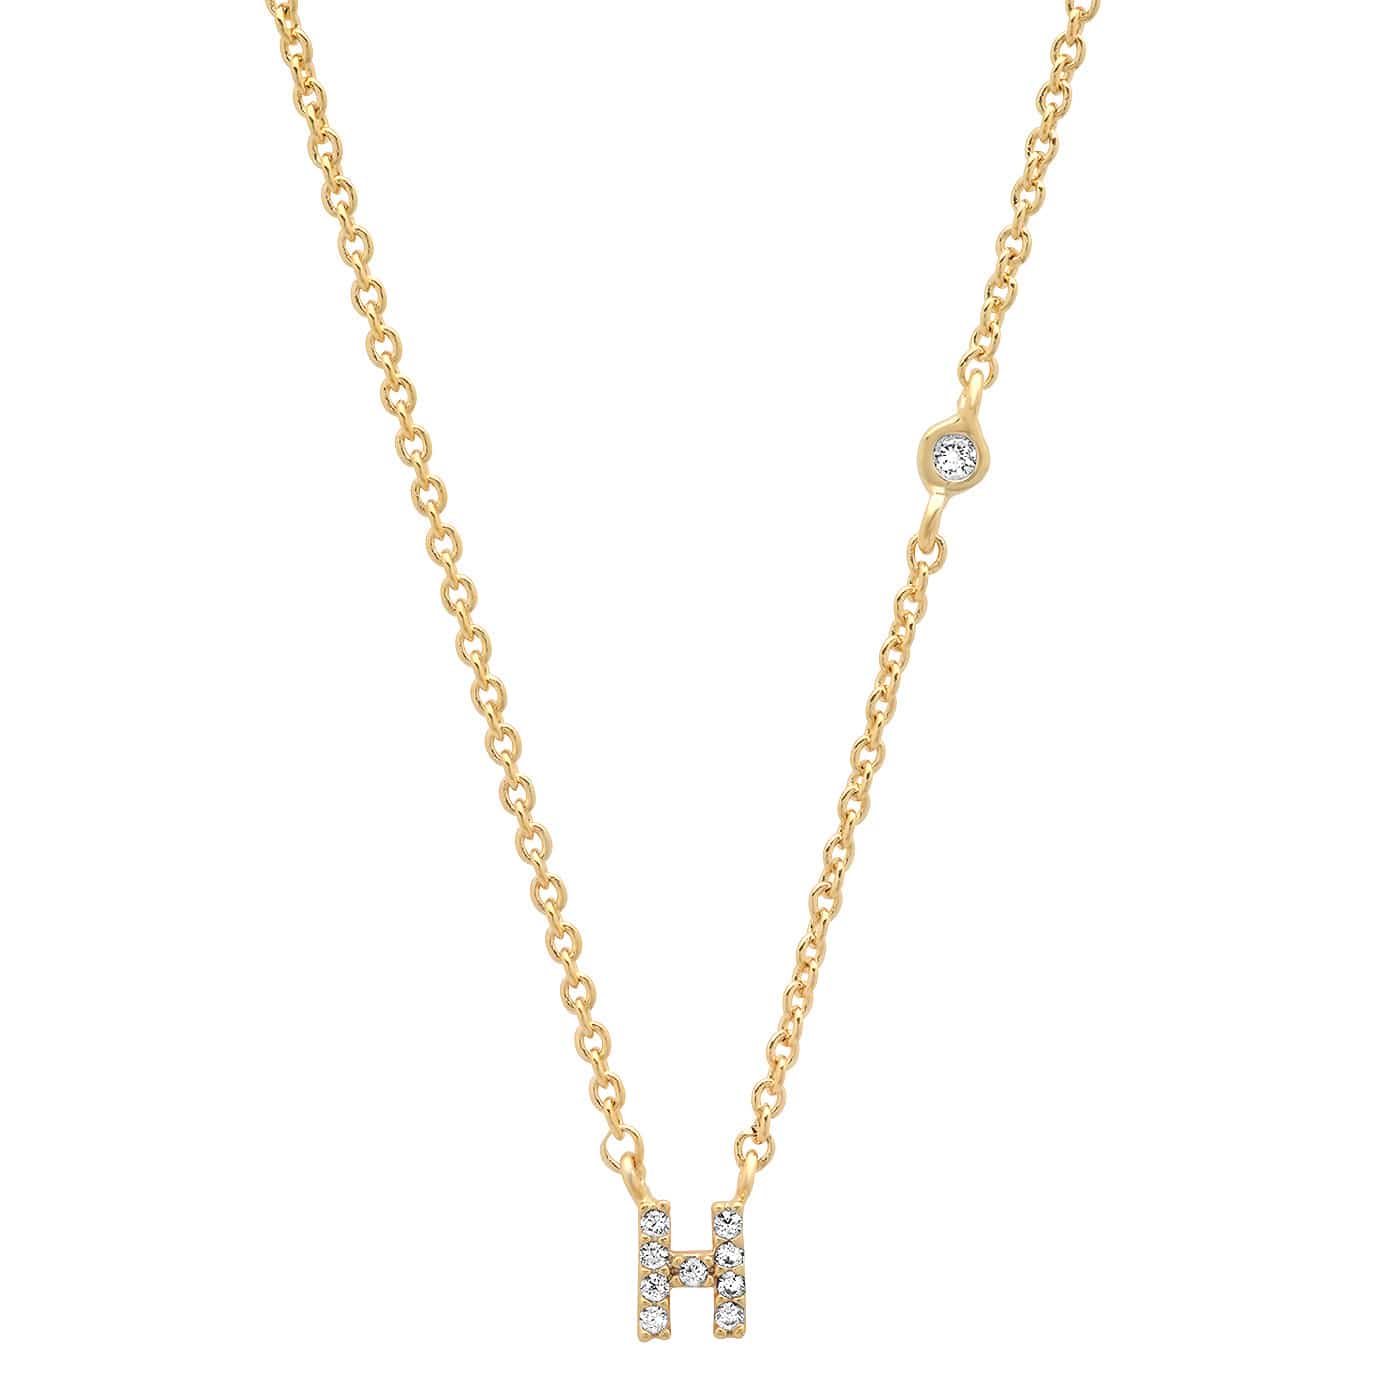 TAI JEWELRY Necklace Gold / H CZ Initial Necklace